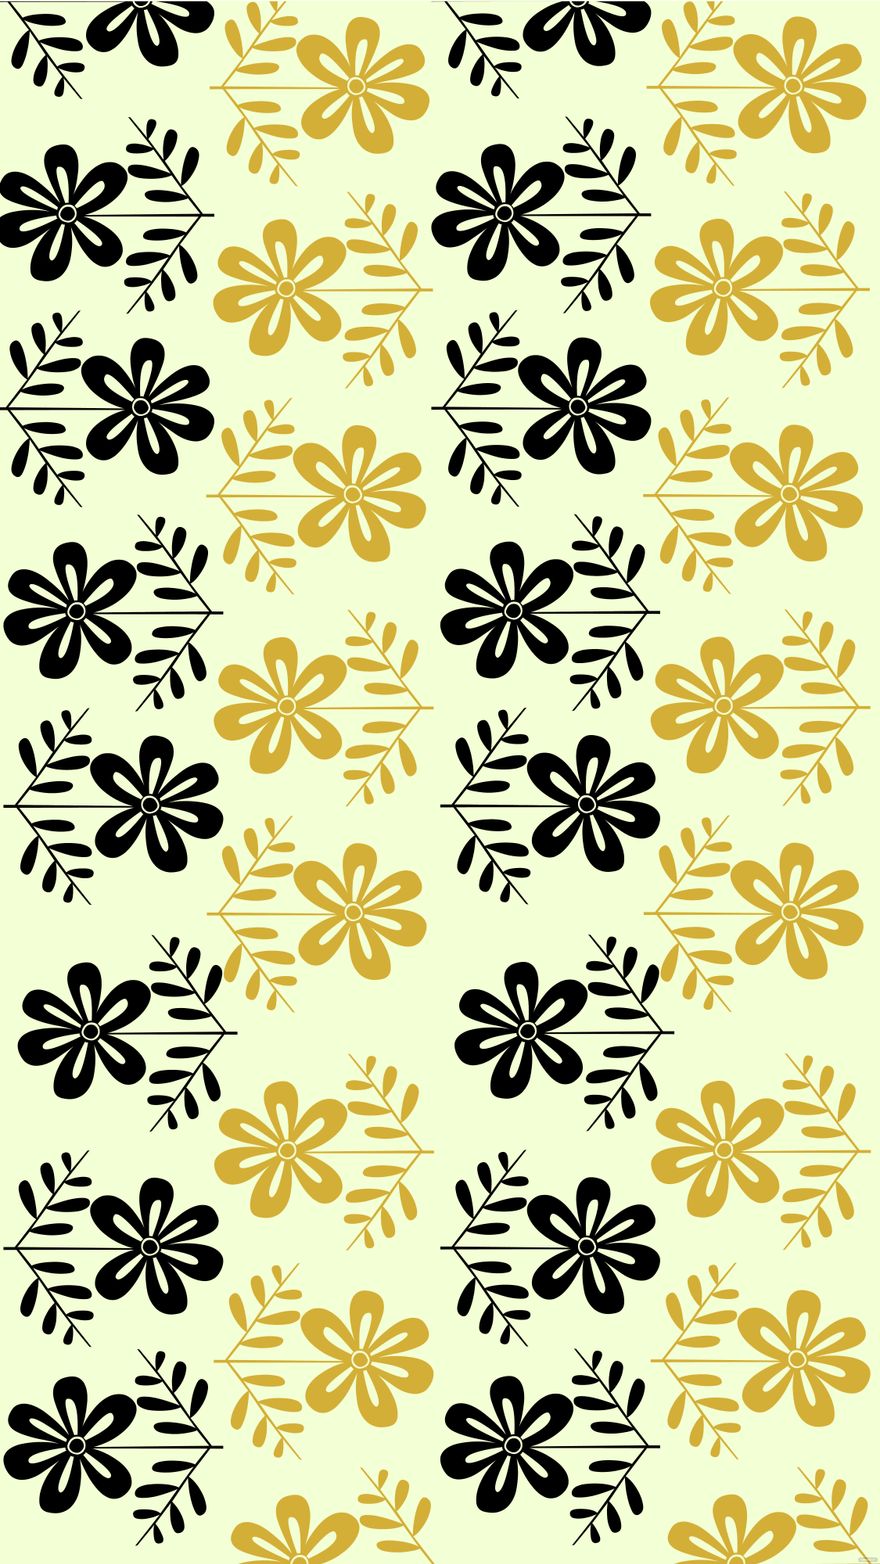 Black and Gold Floral Background